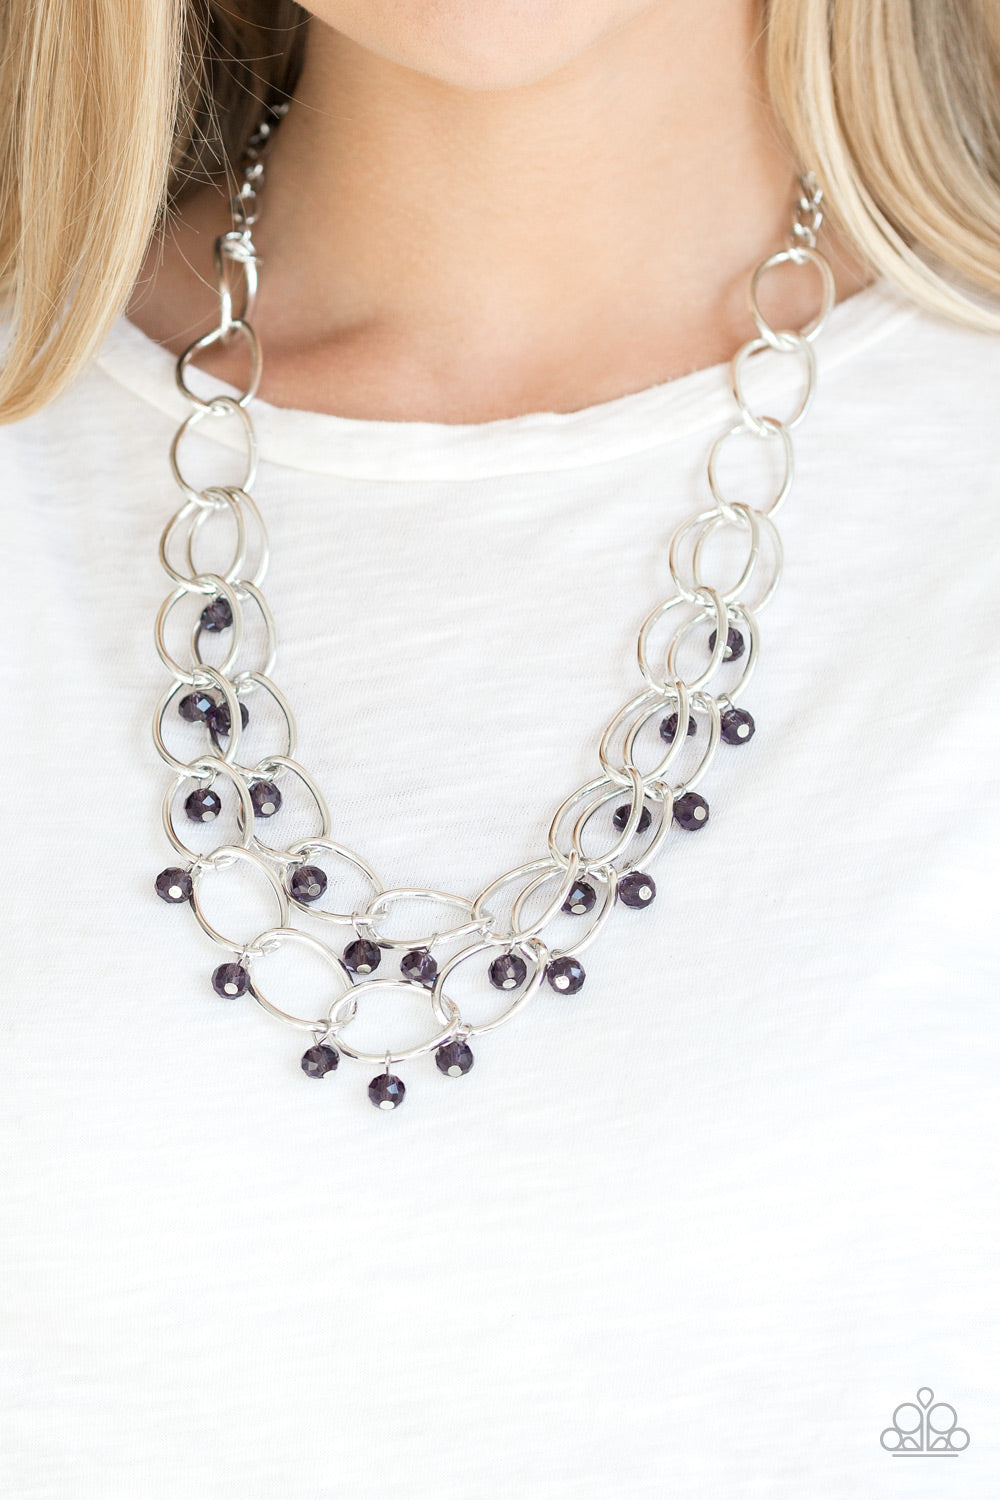 Paparazzi Yacht Tour - Purple Beads - Layered Silver Links - Necklace & Earrings - $5 Jewelry with Ashley Swint